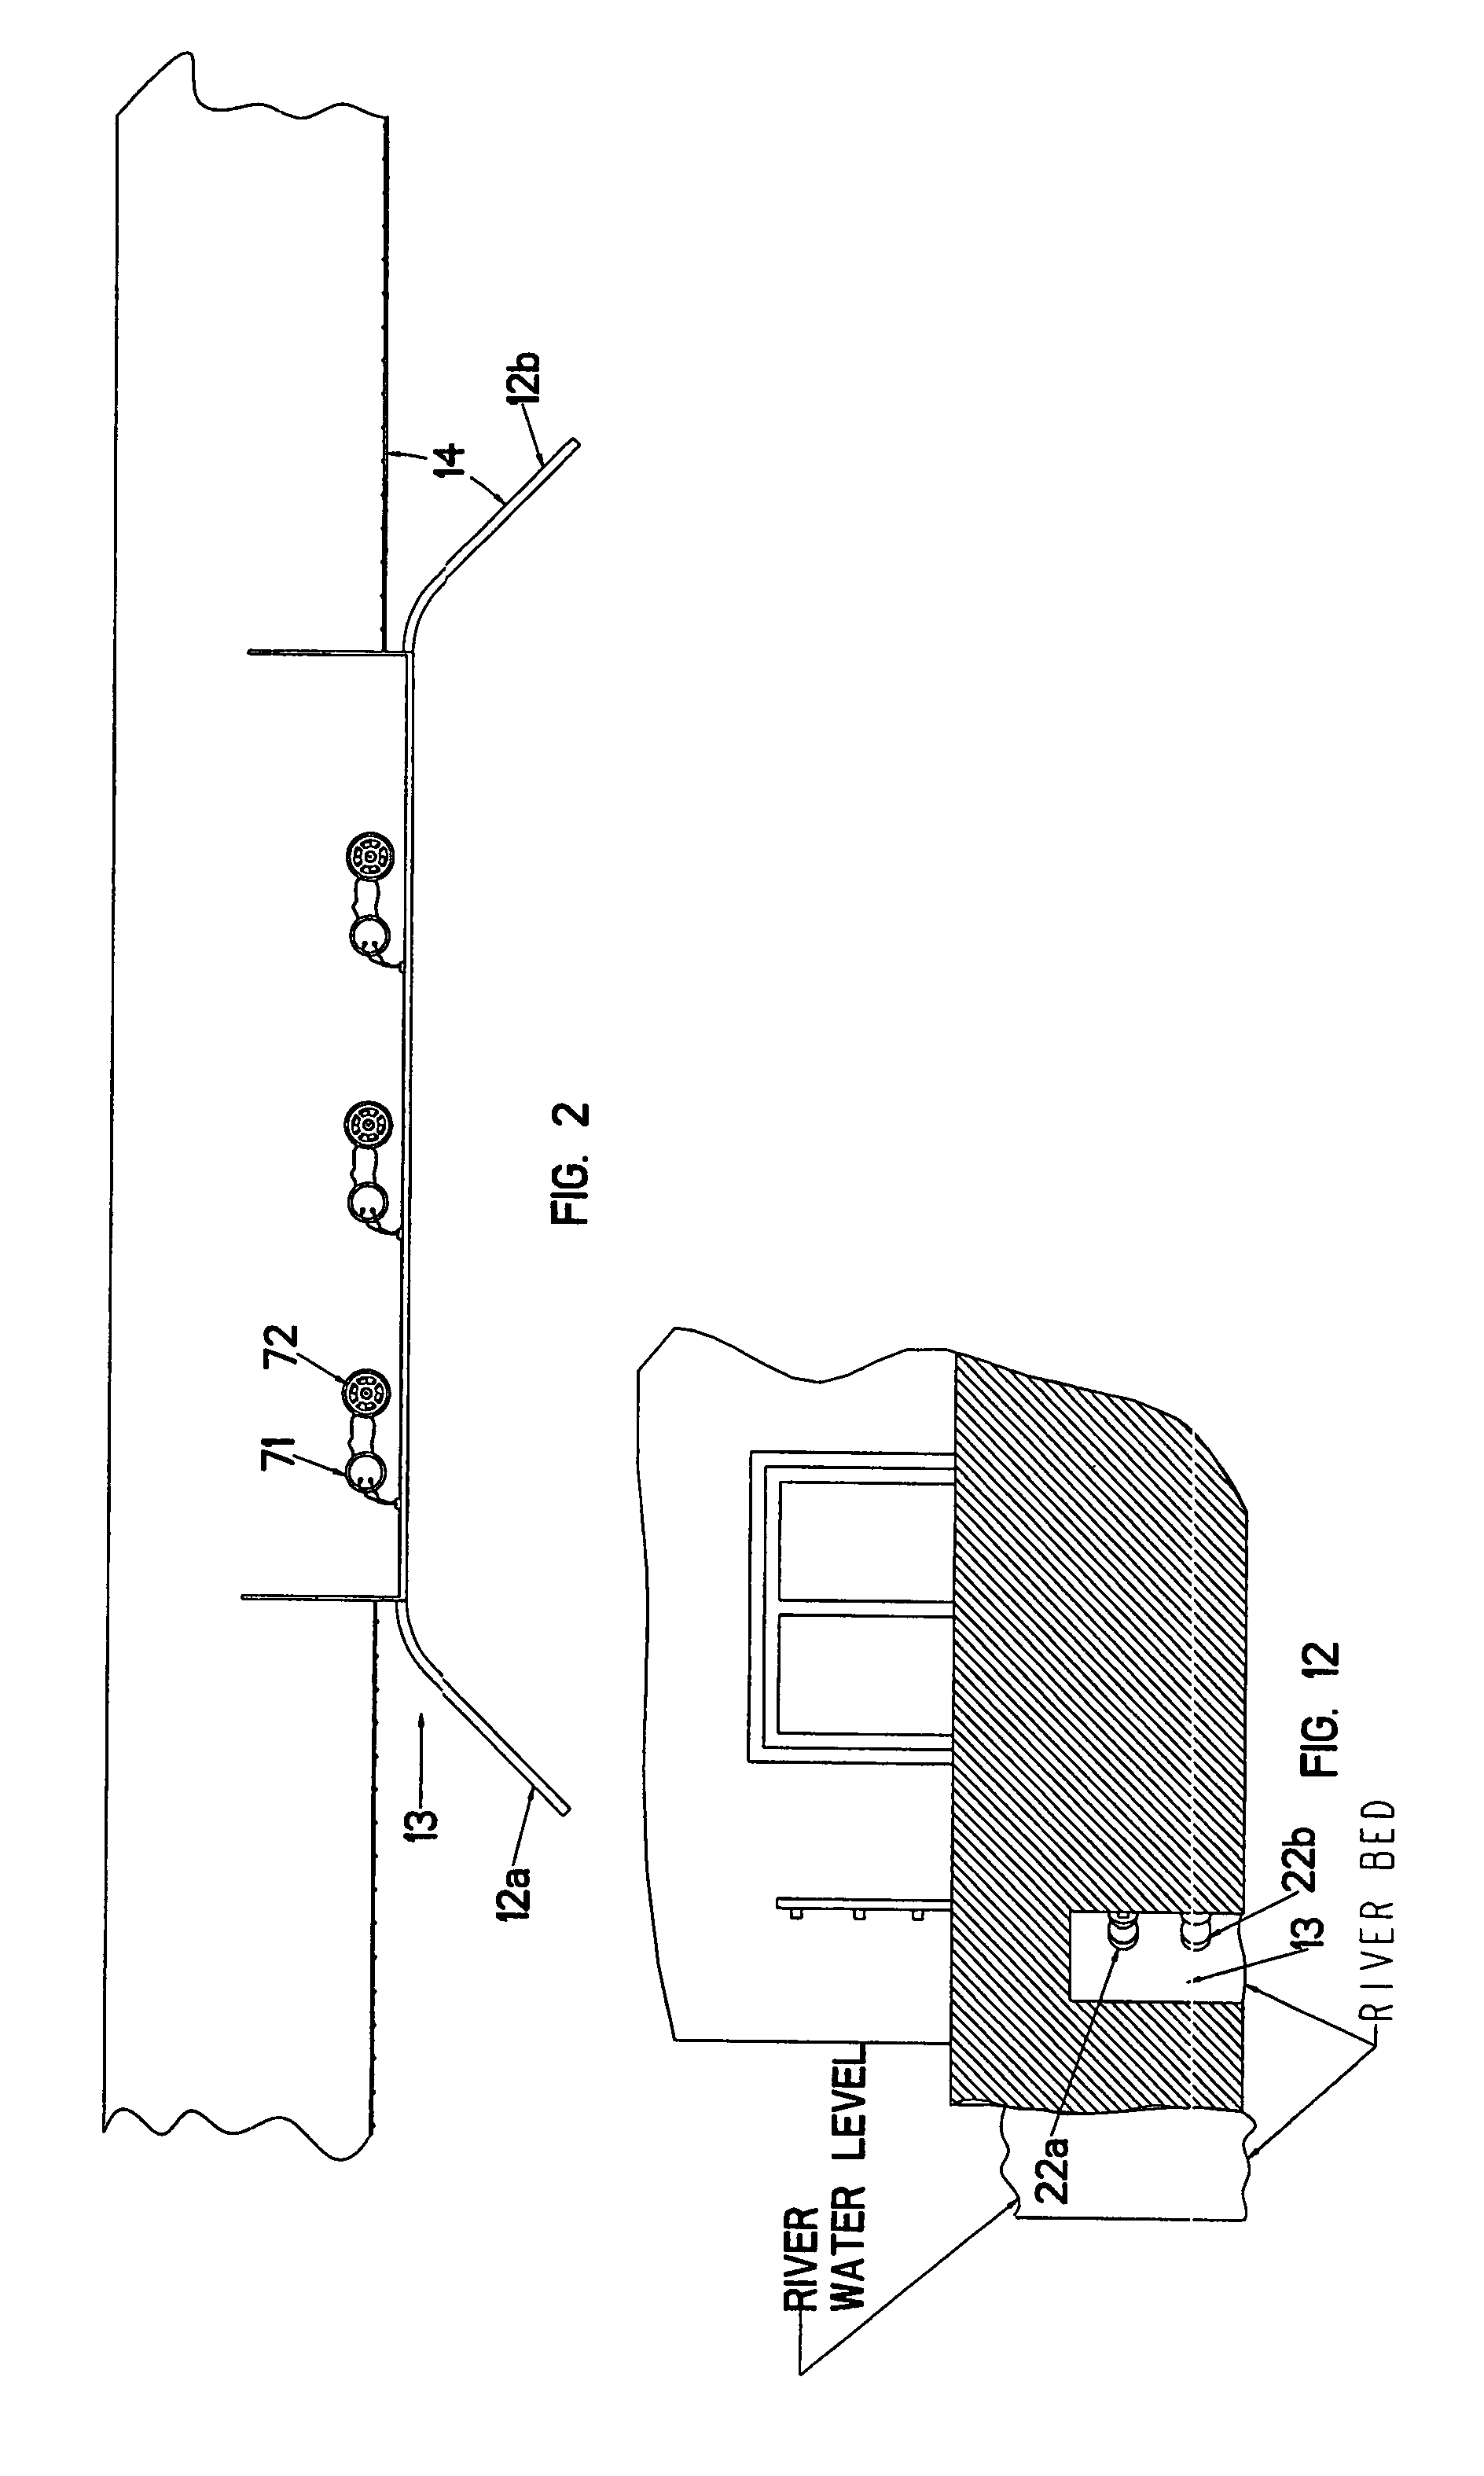 Hydro-electric power generating system with an adjustable water diversion system